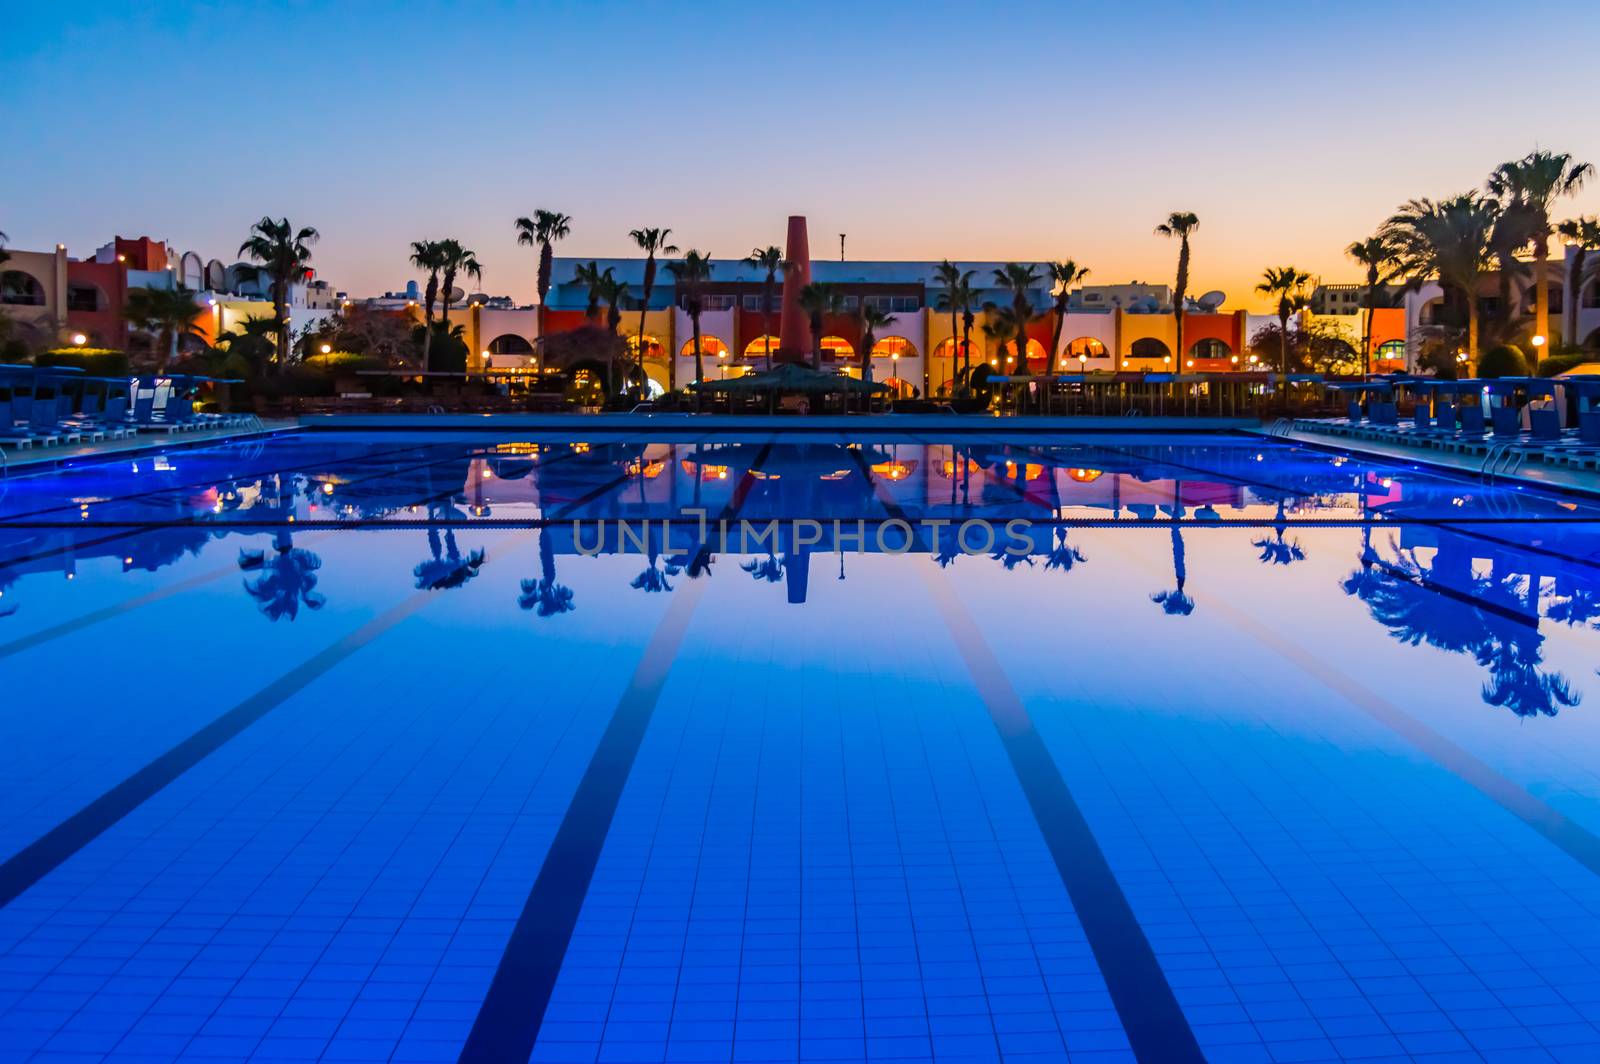 View of a pool at sunset with reflections of palm trees and buildings in the water in the city of Hurghada